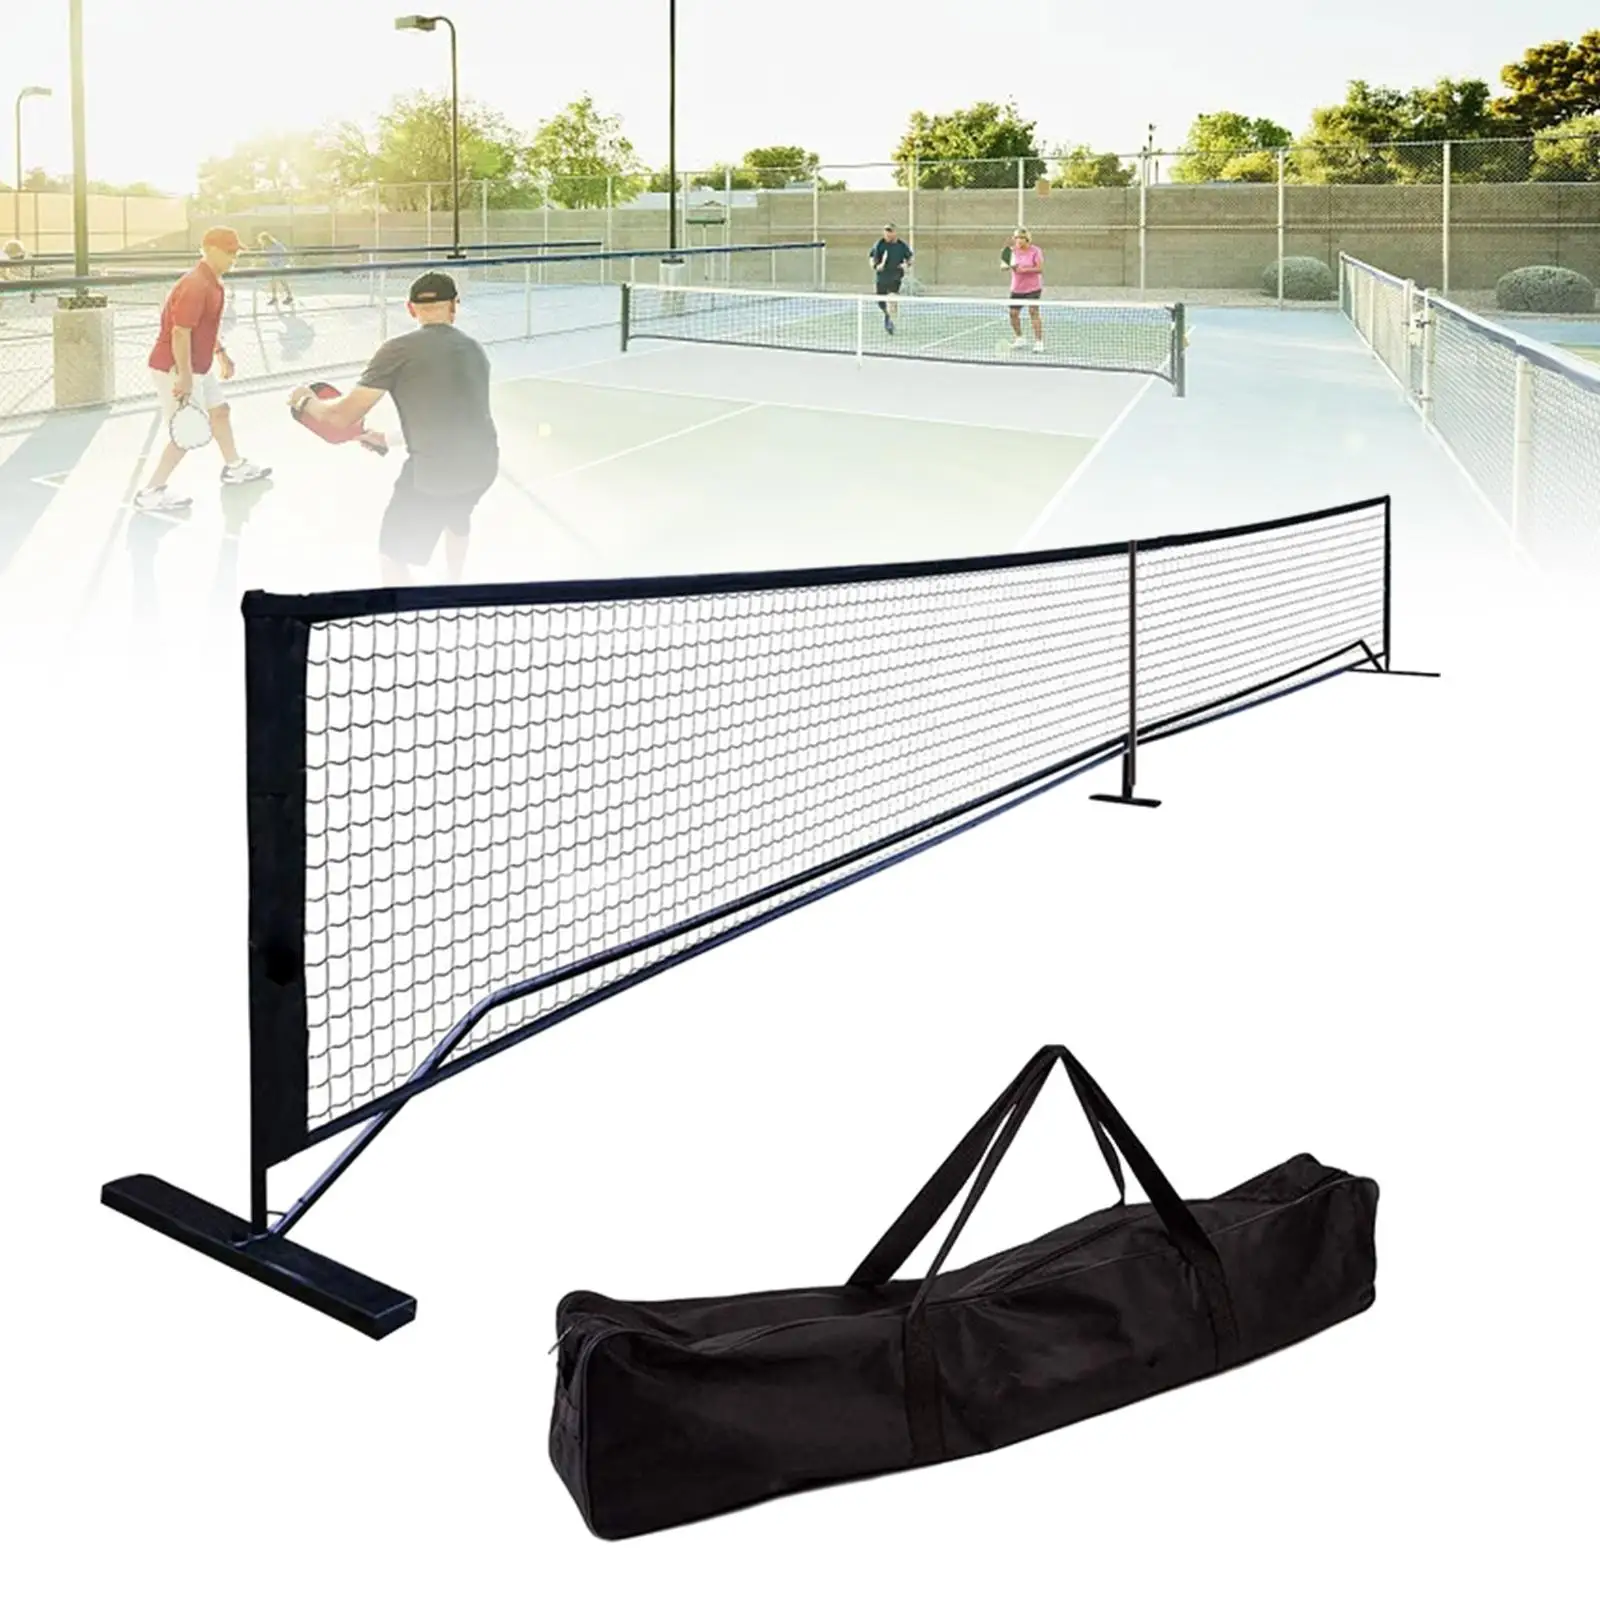 

Portable Pickleball Net System Public Playground Parties Metal Frame Stand with Storage Bag Durable Lawns Backyards Easy Setup